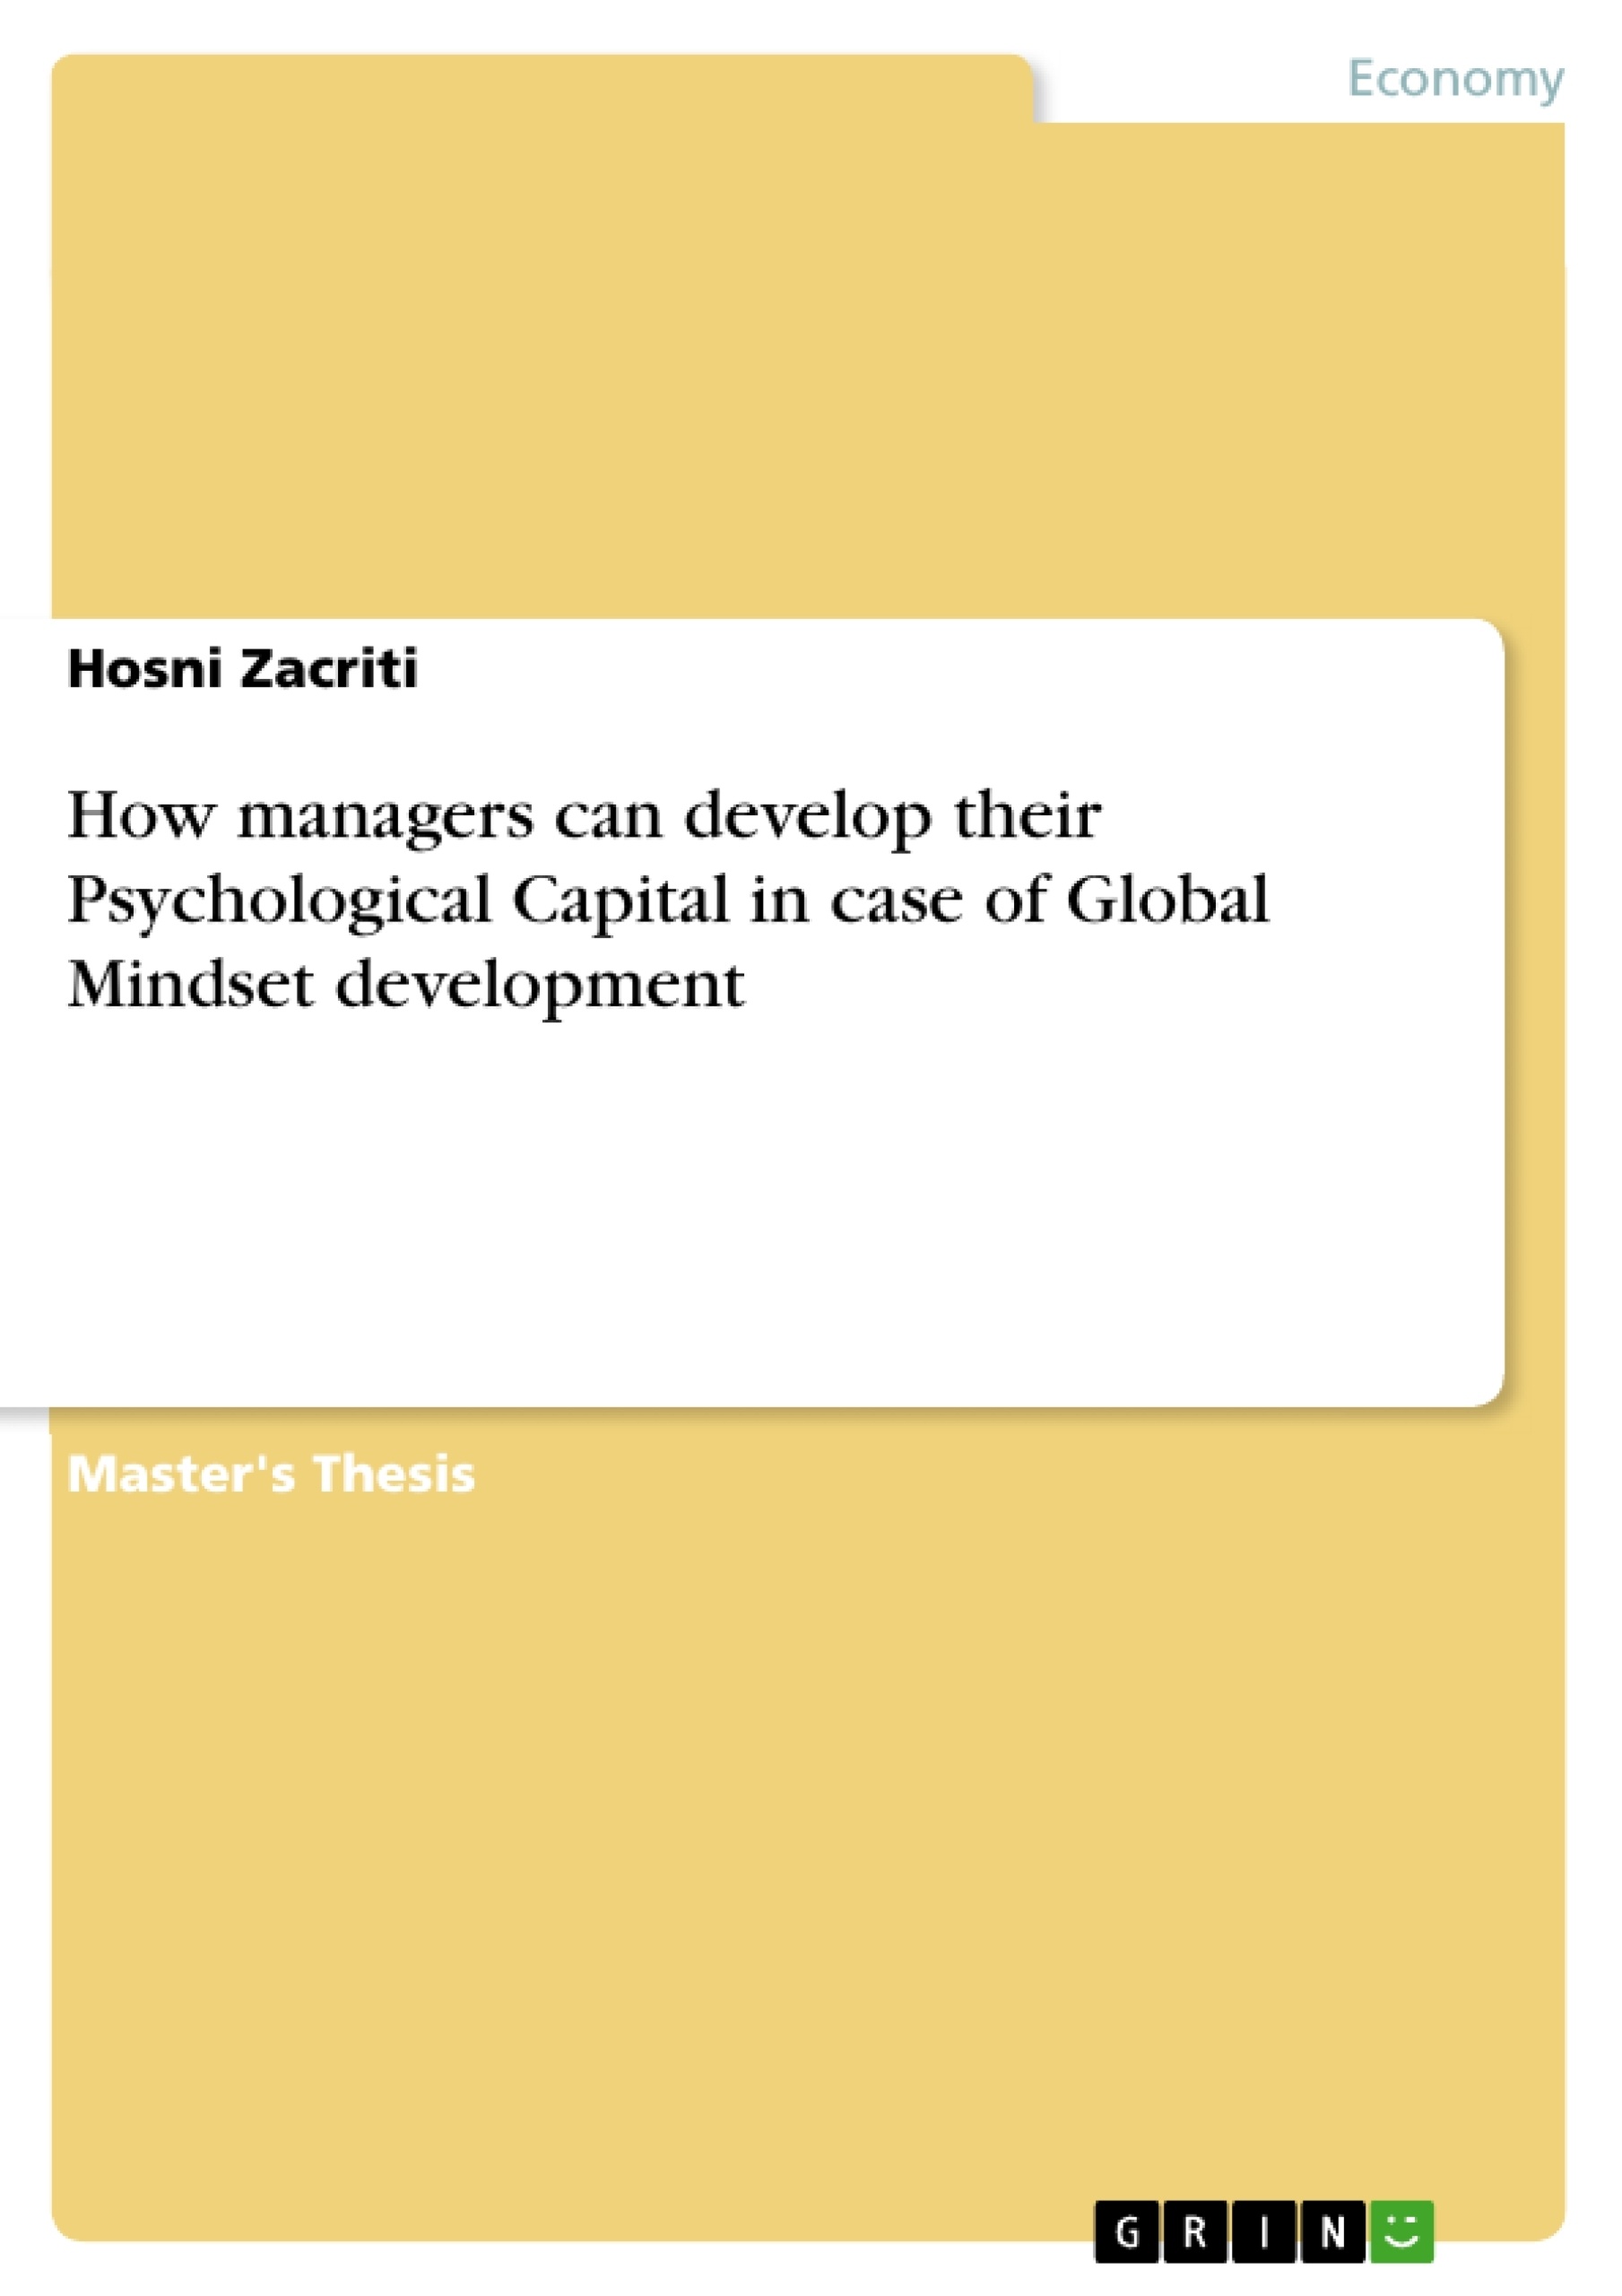 Titre: How managers can develop their Psychological Capital in case of Global Mindset development